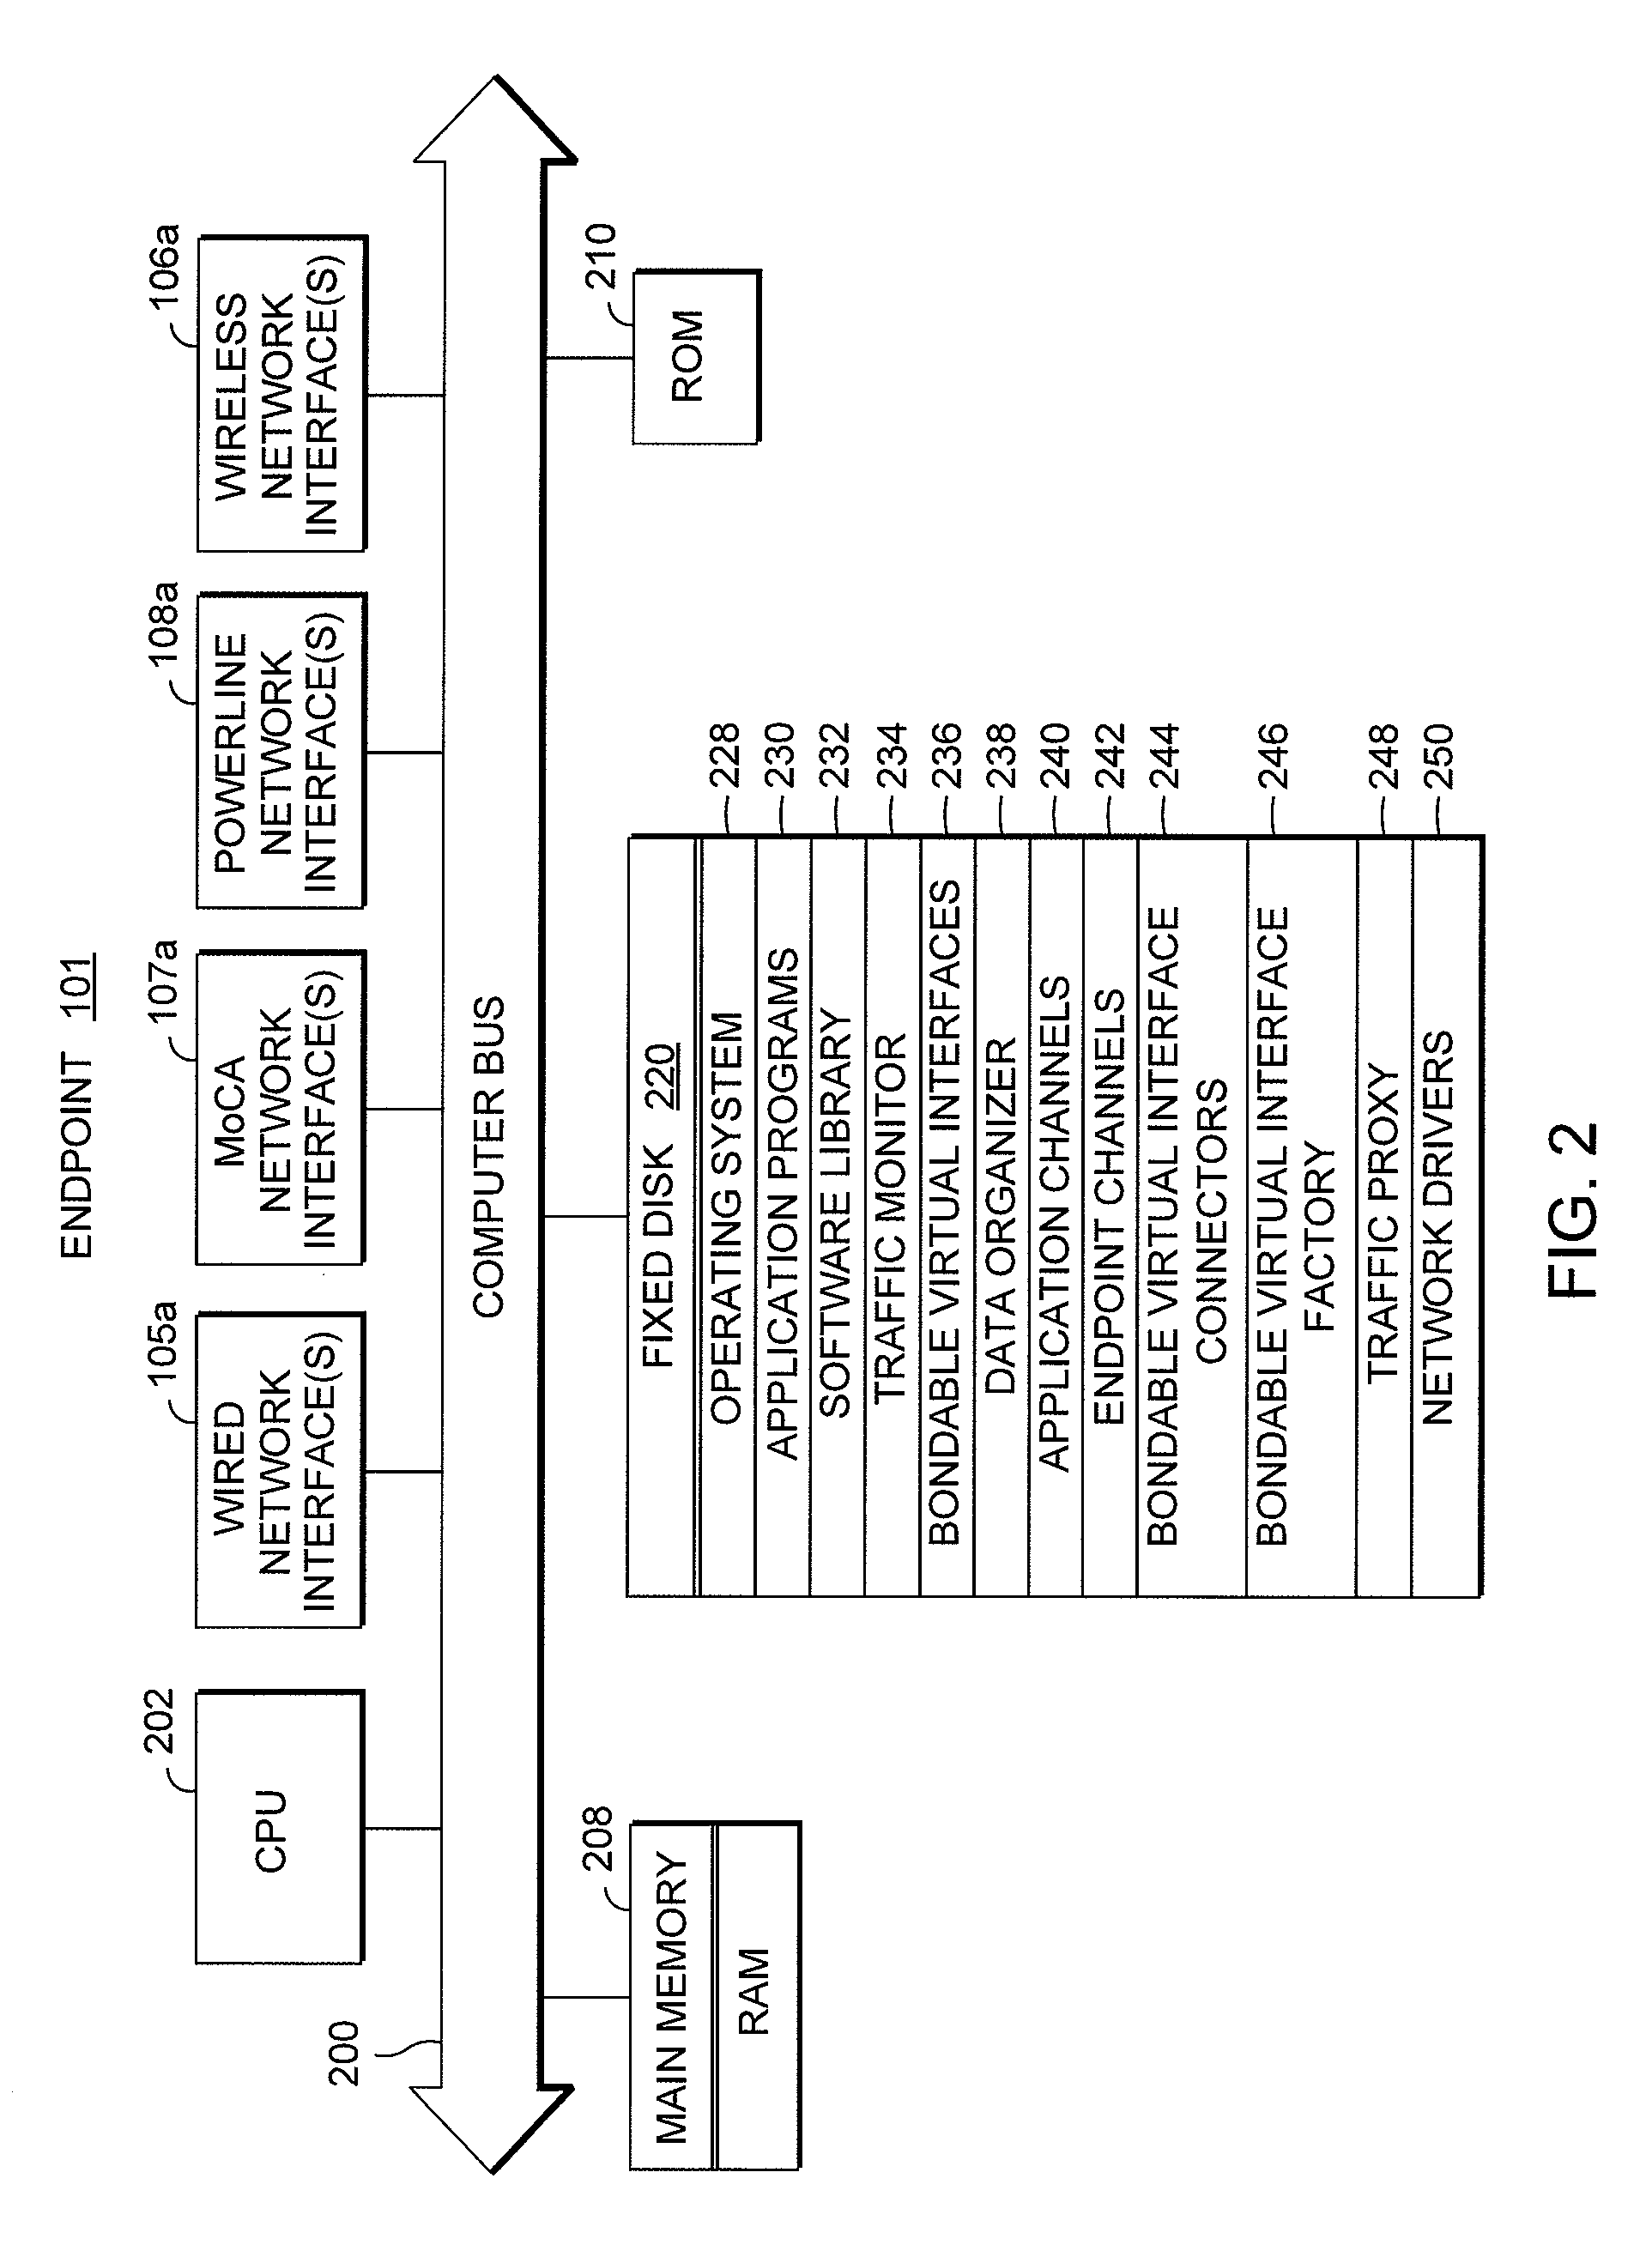 Reliable network streaming of a single data stream over multiple physical interfaces